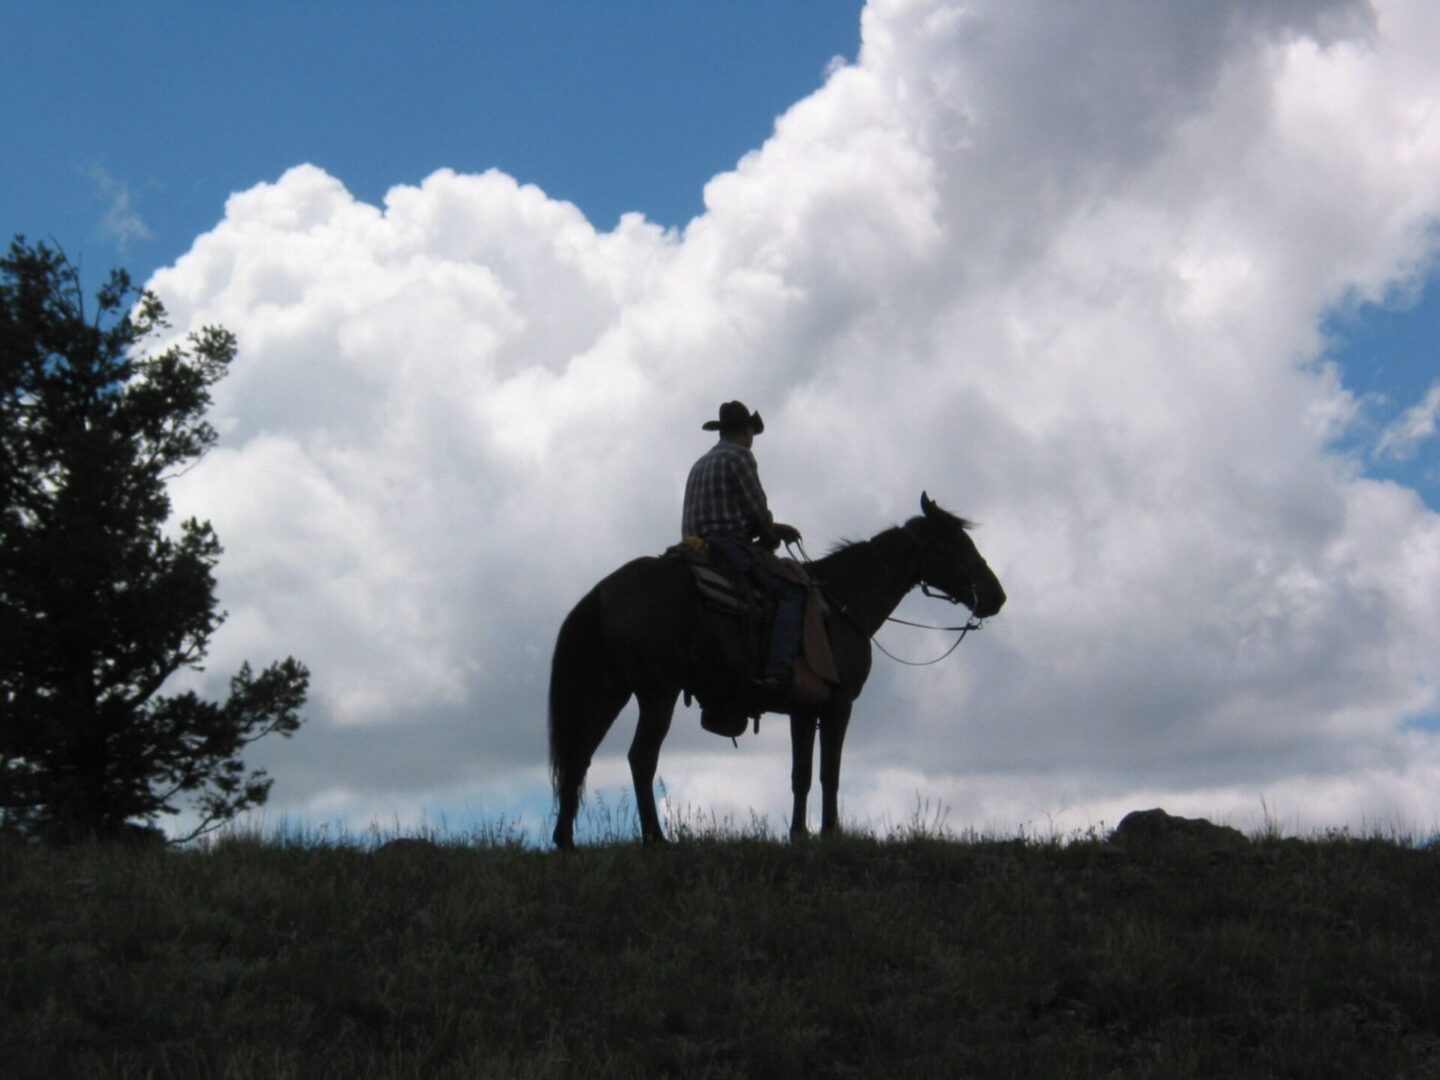 A man on horseback in the middle of a field.